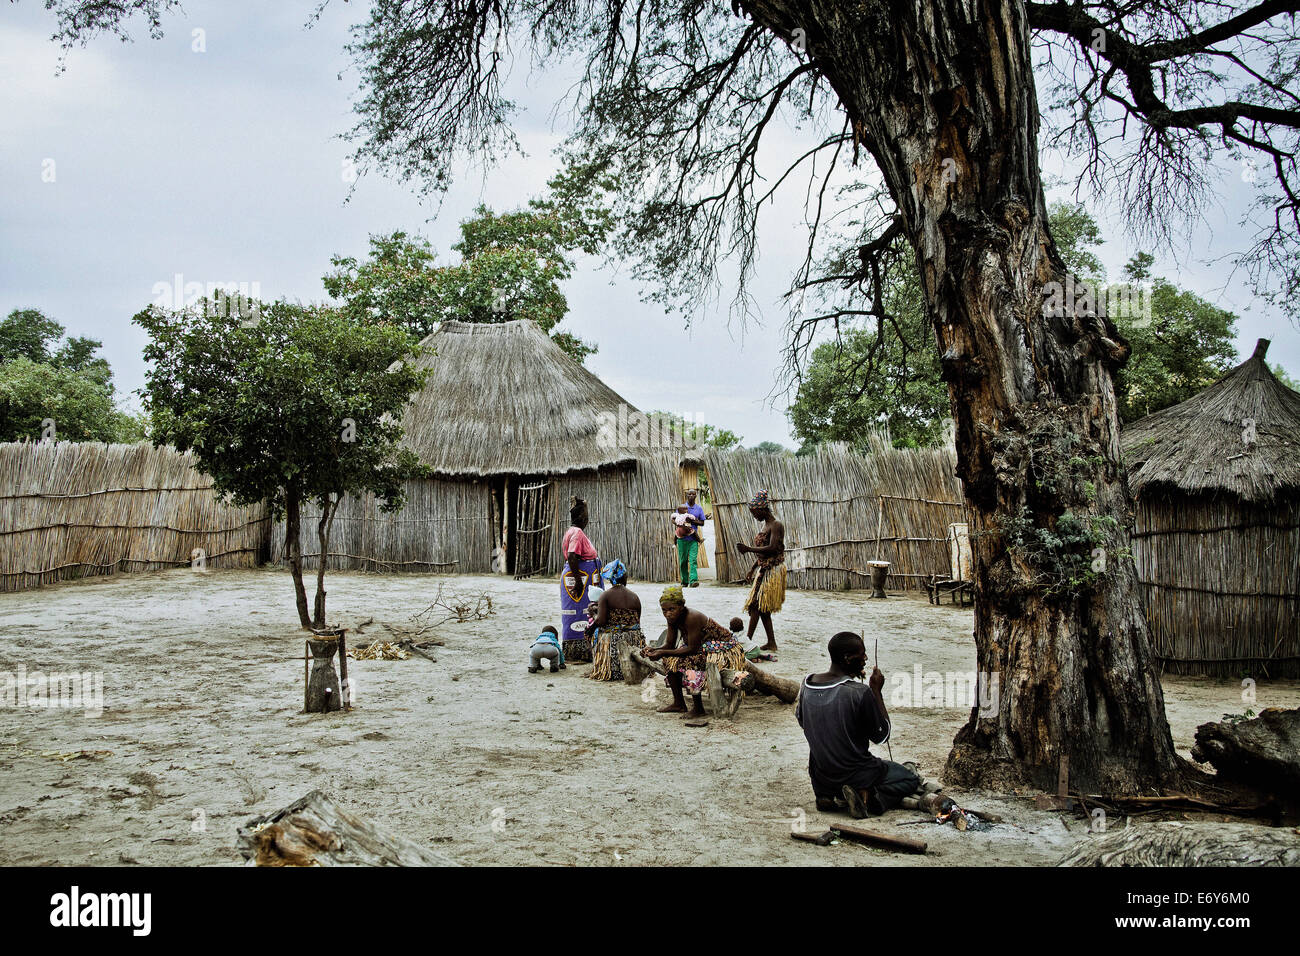 People in a traditional village of the Lozi tribe, Caprivi region, Namibia, Africa Stock Photo